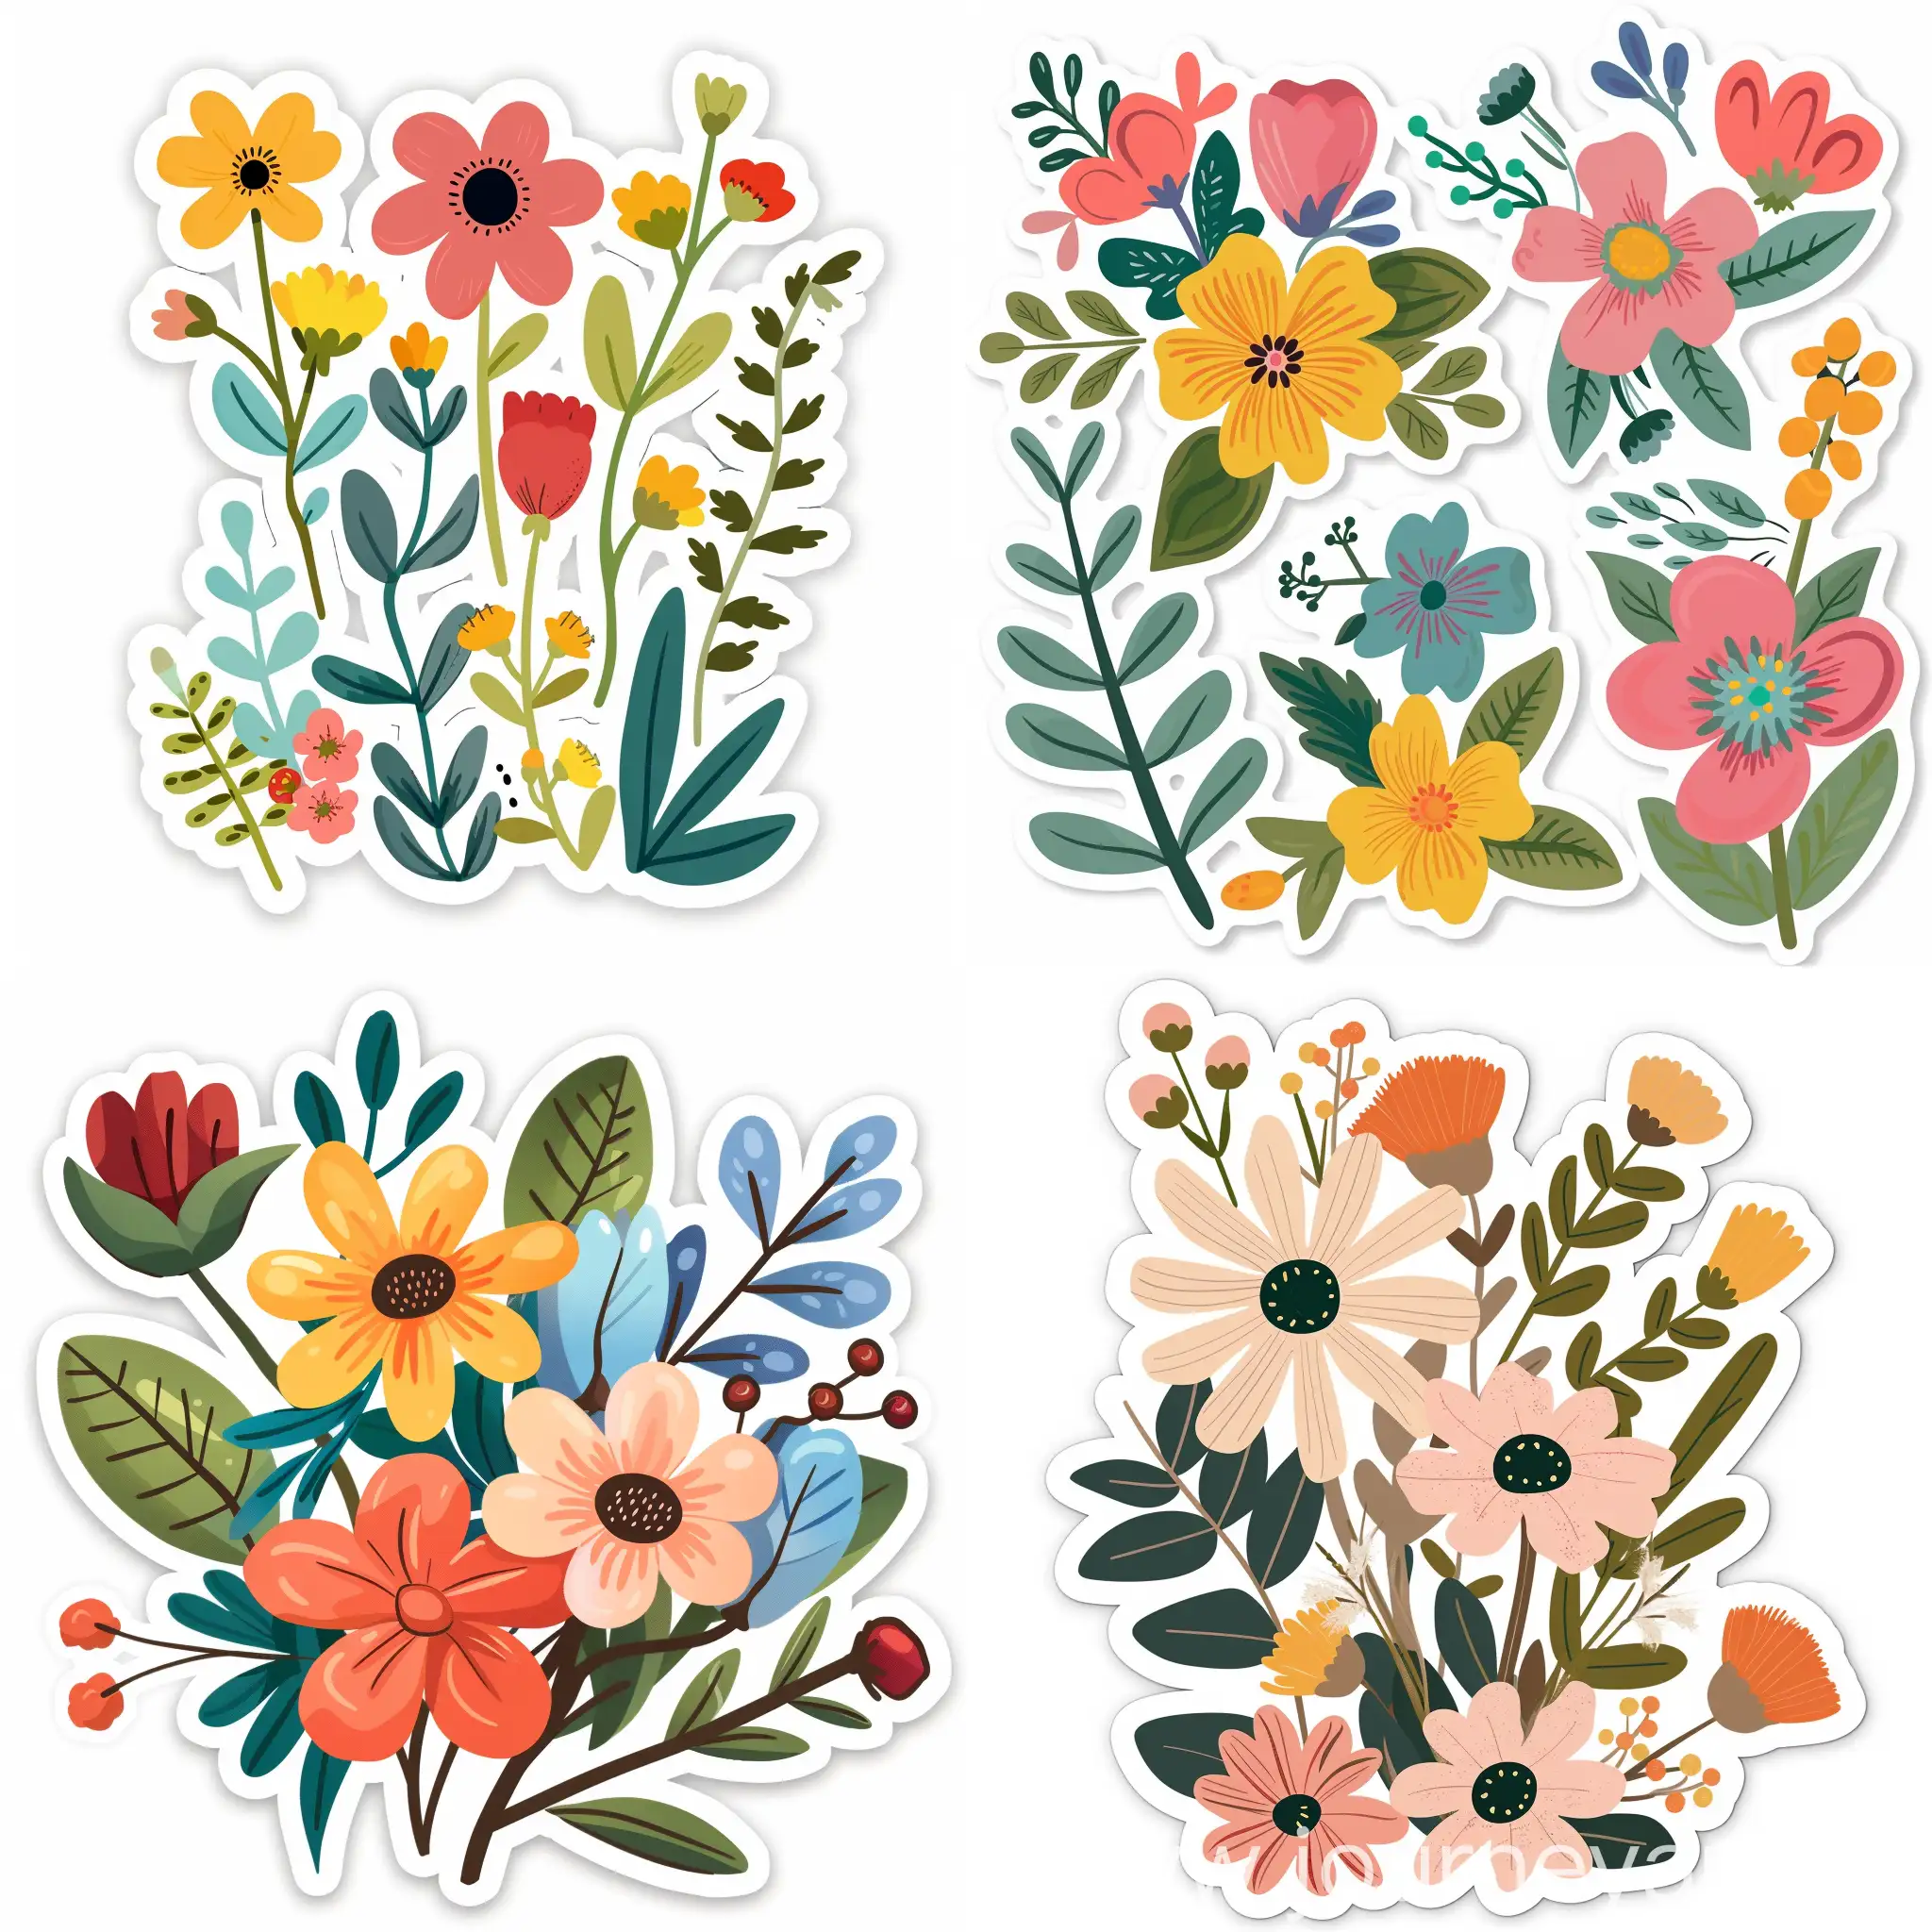 sticker design of simple flowers, in flat style, high quality details, 